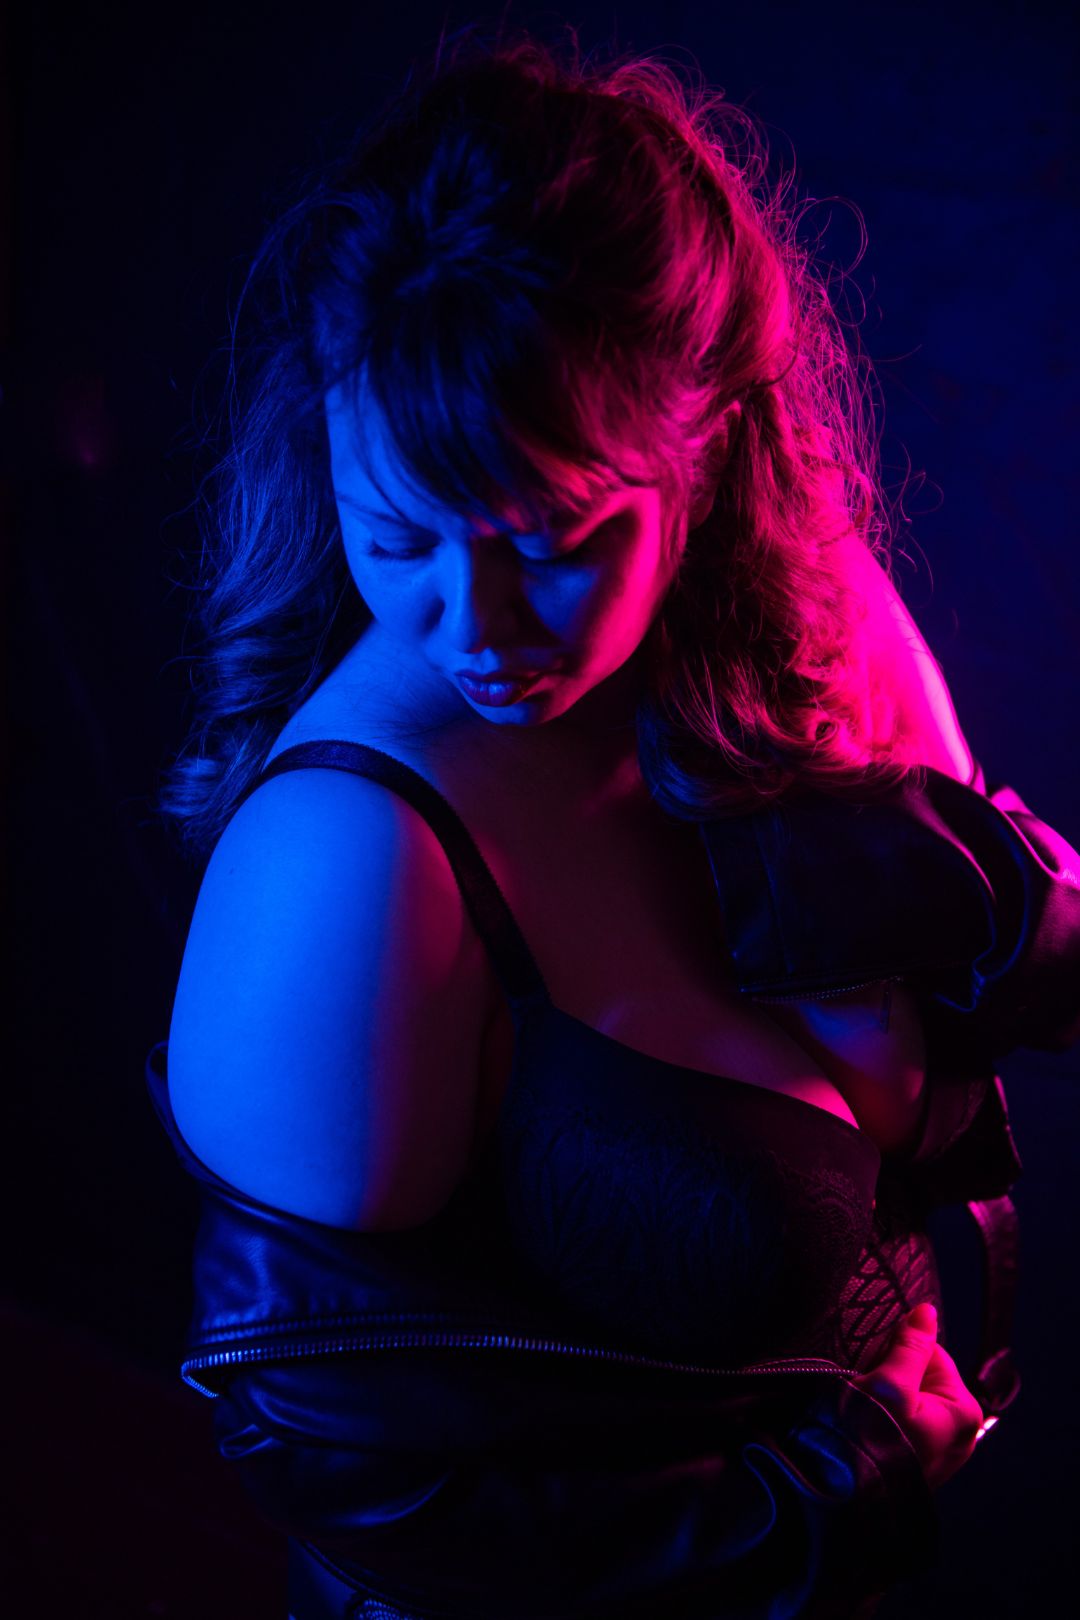 Photoshoot of a woman in red and blue neon room